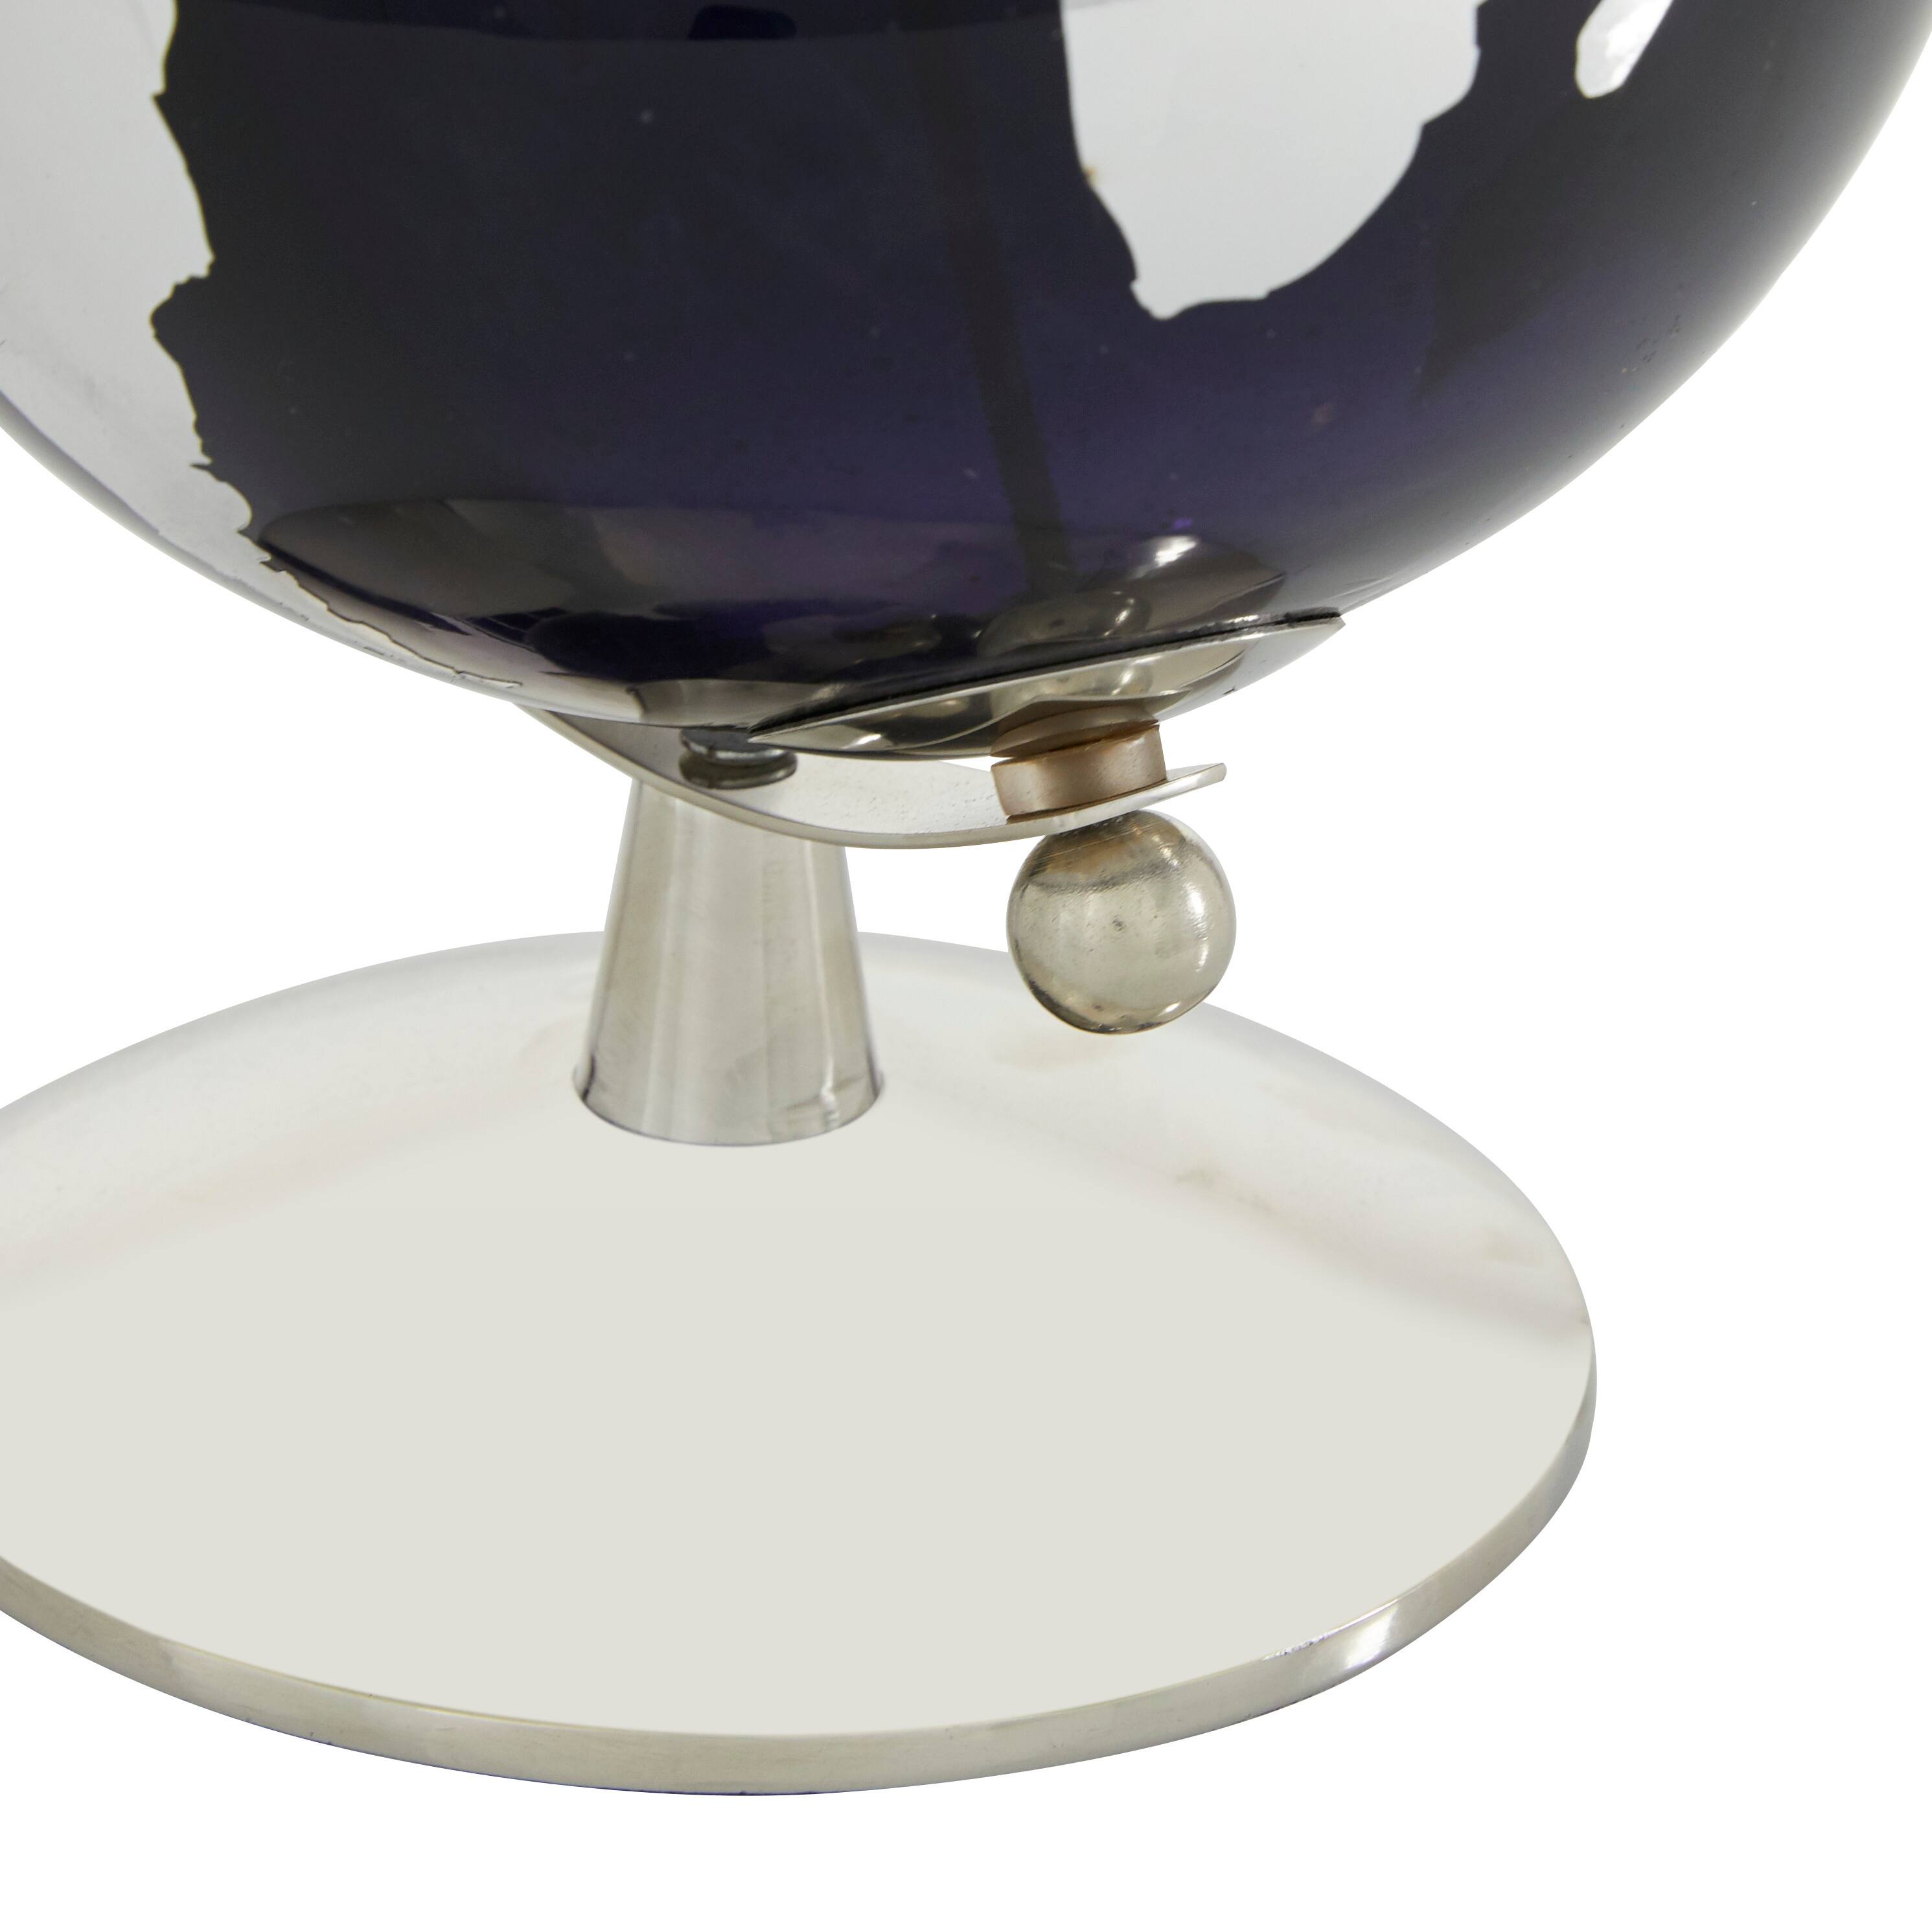 Black Stainless Steel Globe with Silver Accents - 6x8